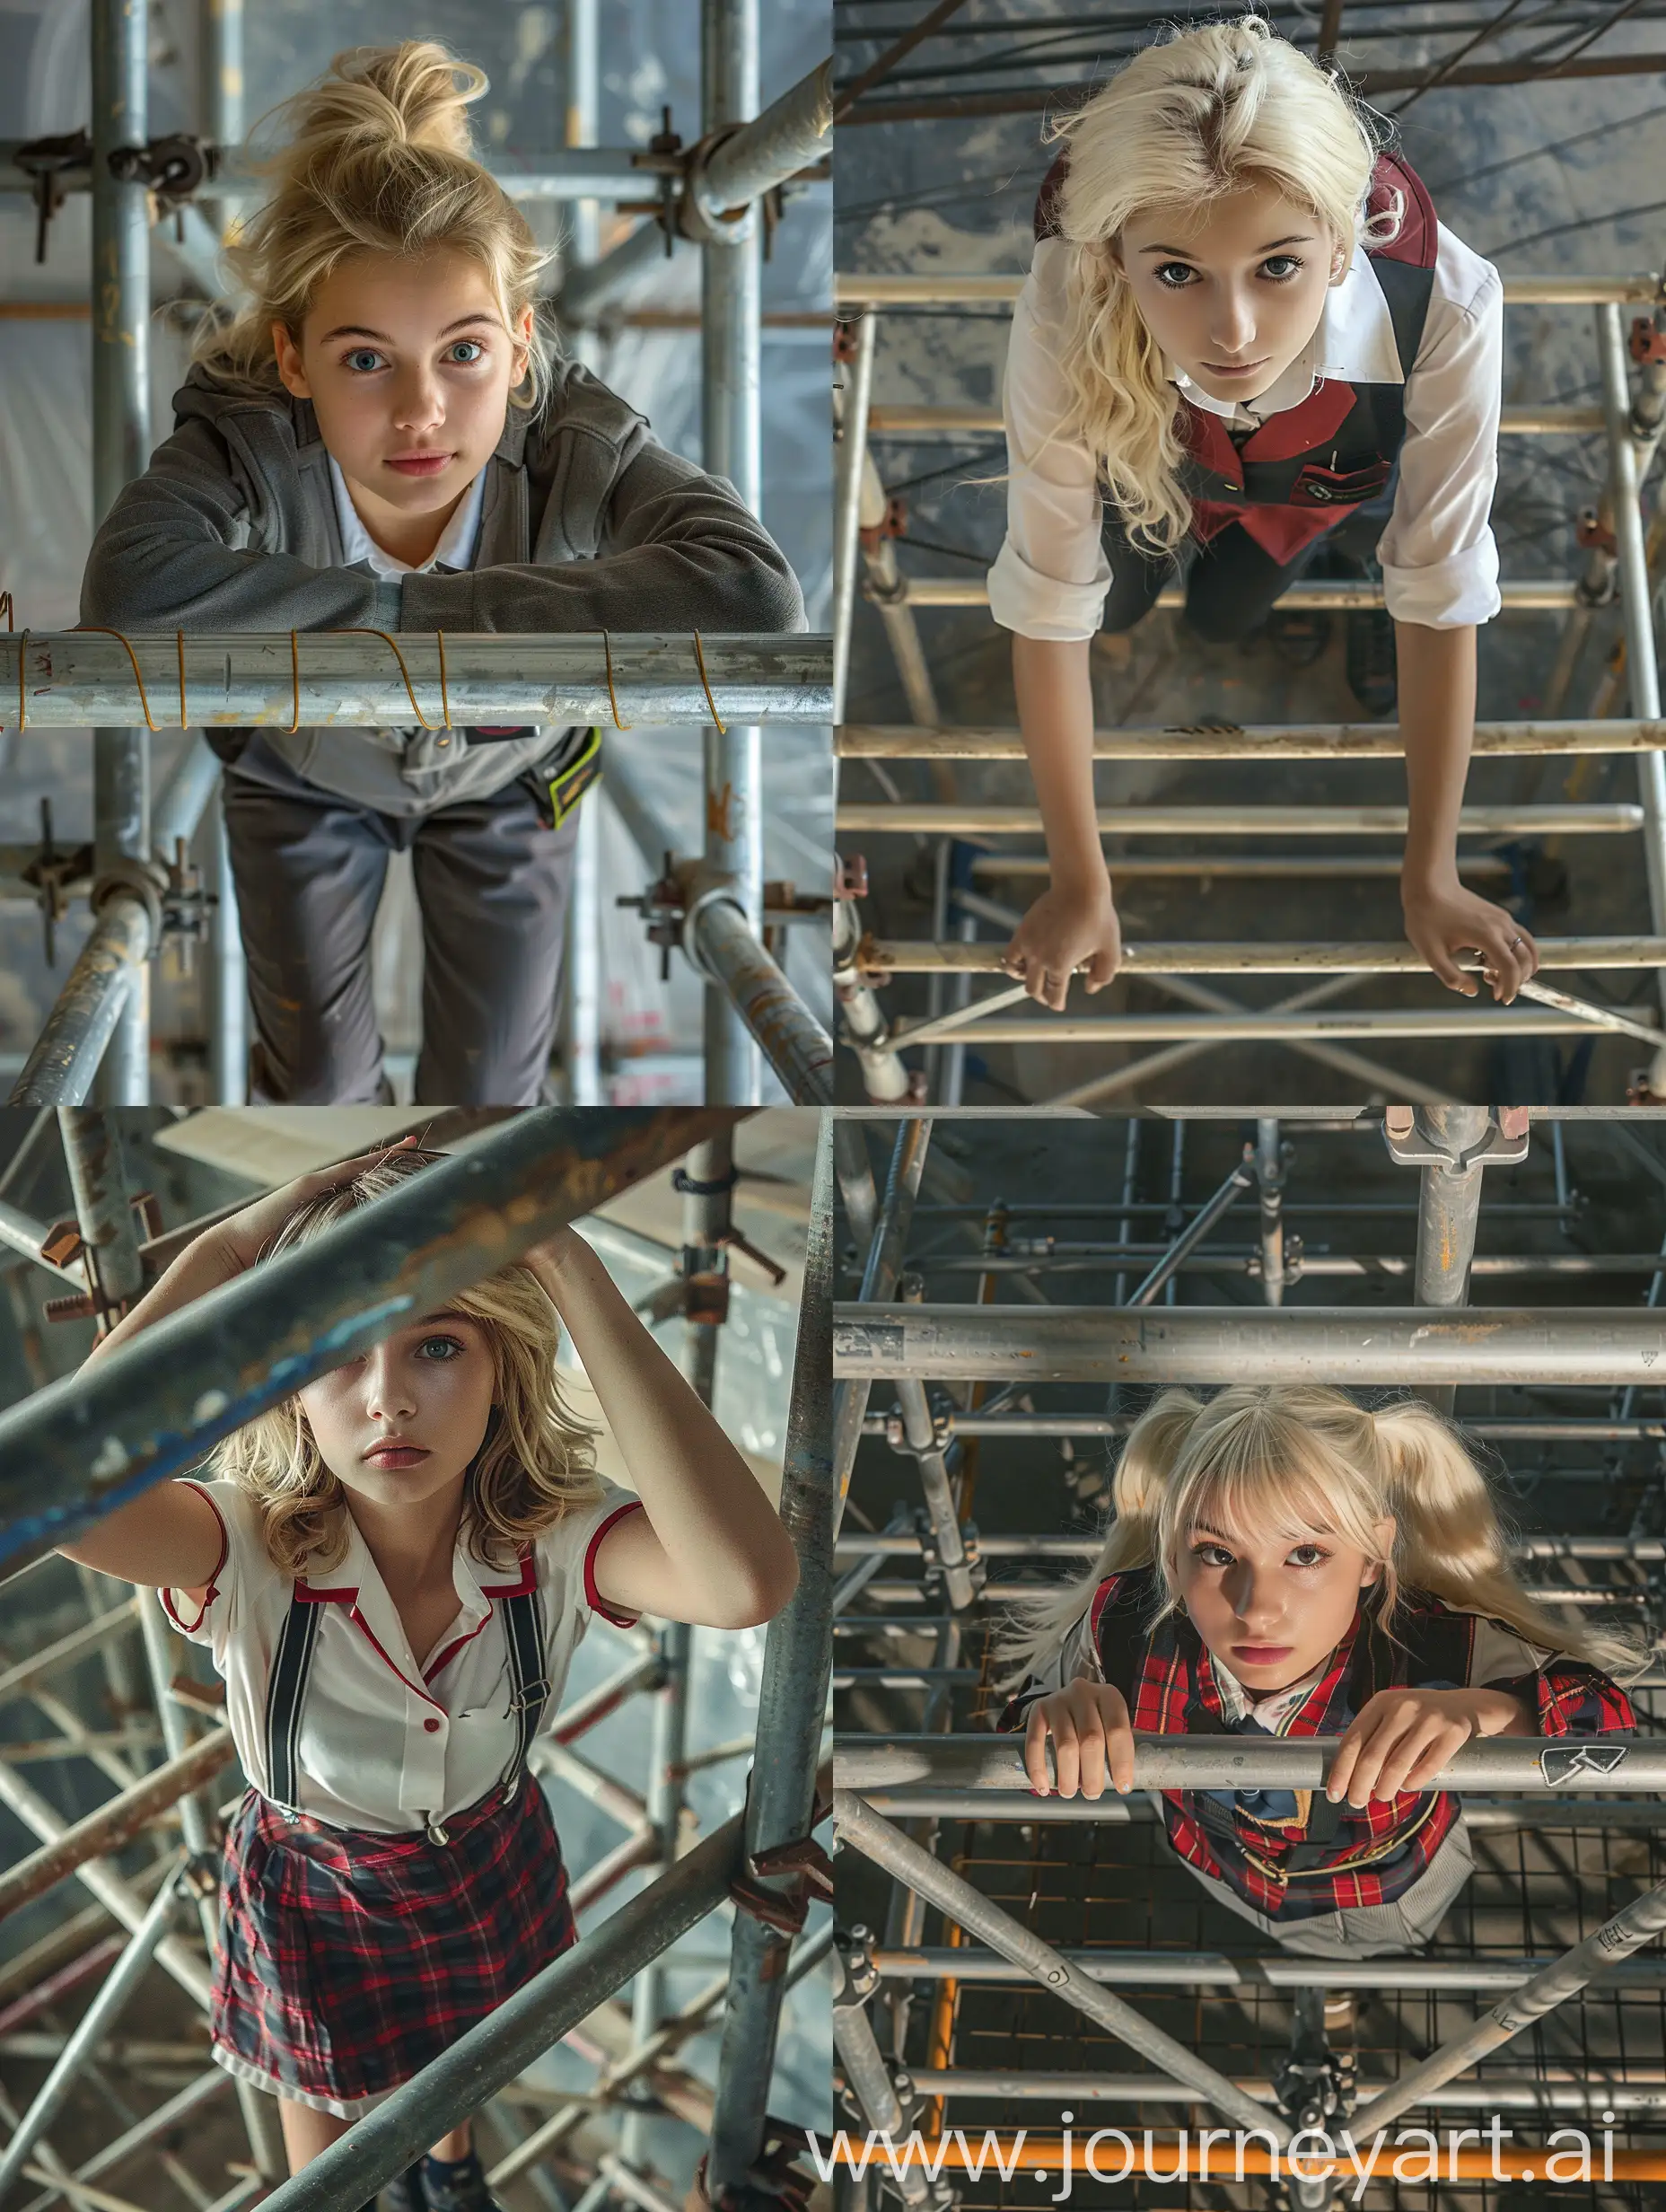 Young-Blonde-Girl-in-School-Uniform-on-Construction-Scaffold